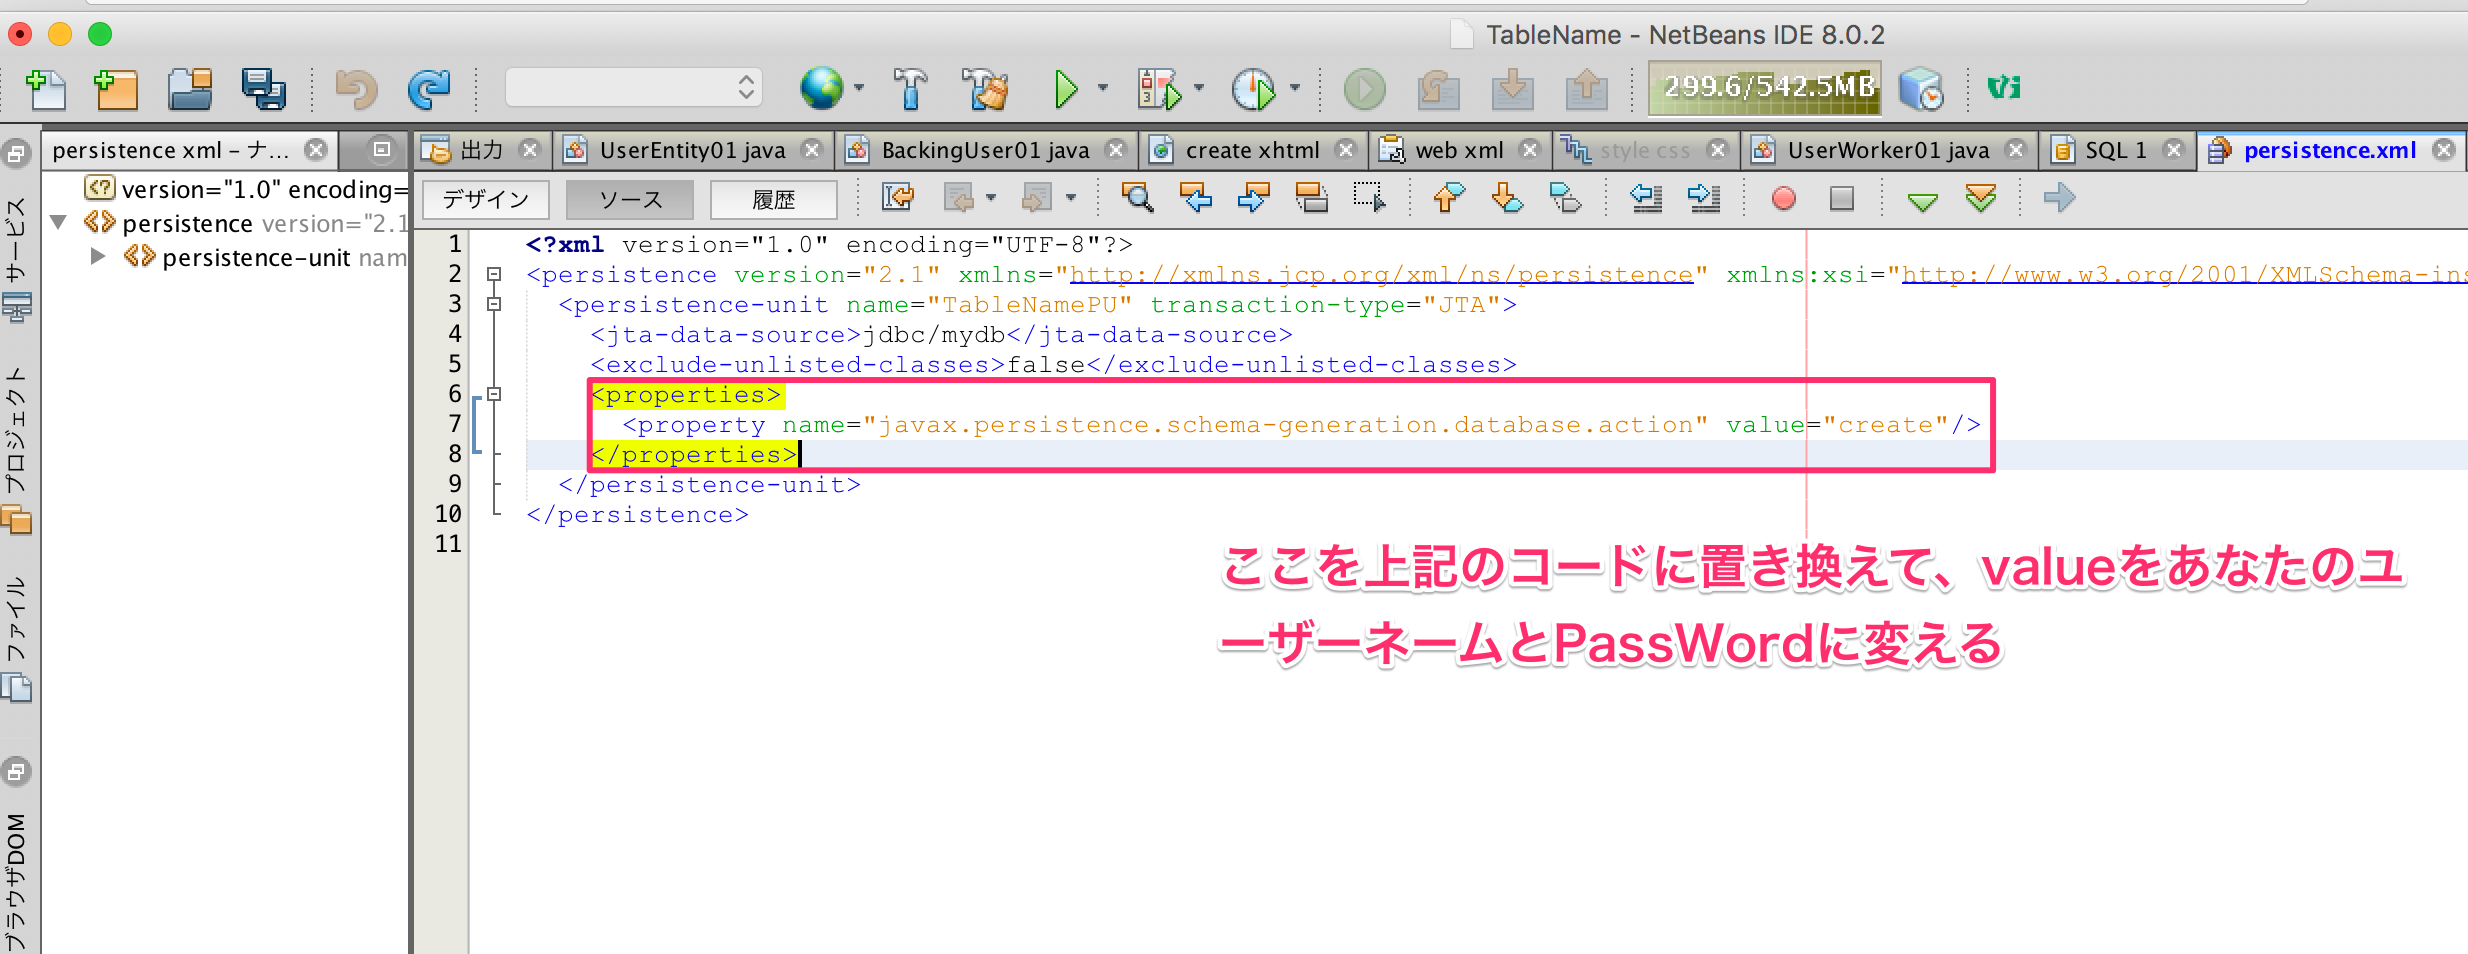 【GlassFish Server】解決！「接続認証エラーが発生しました。理由: ユーザーIDまたはパスワードが無効です。」「Error in allocating a connection. Cause: Connection could not be allocated because」